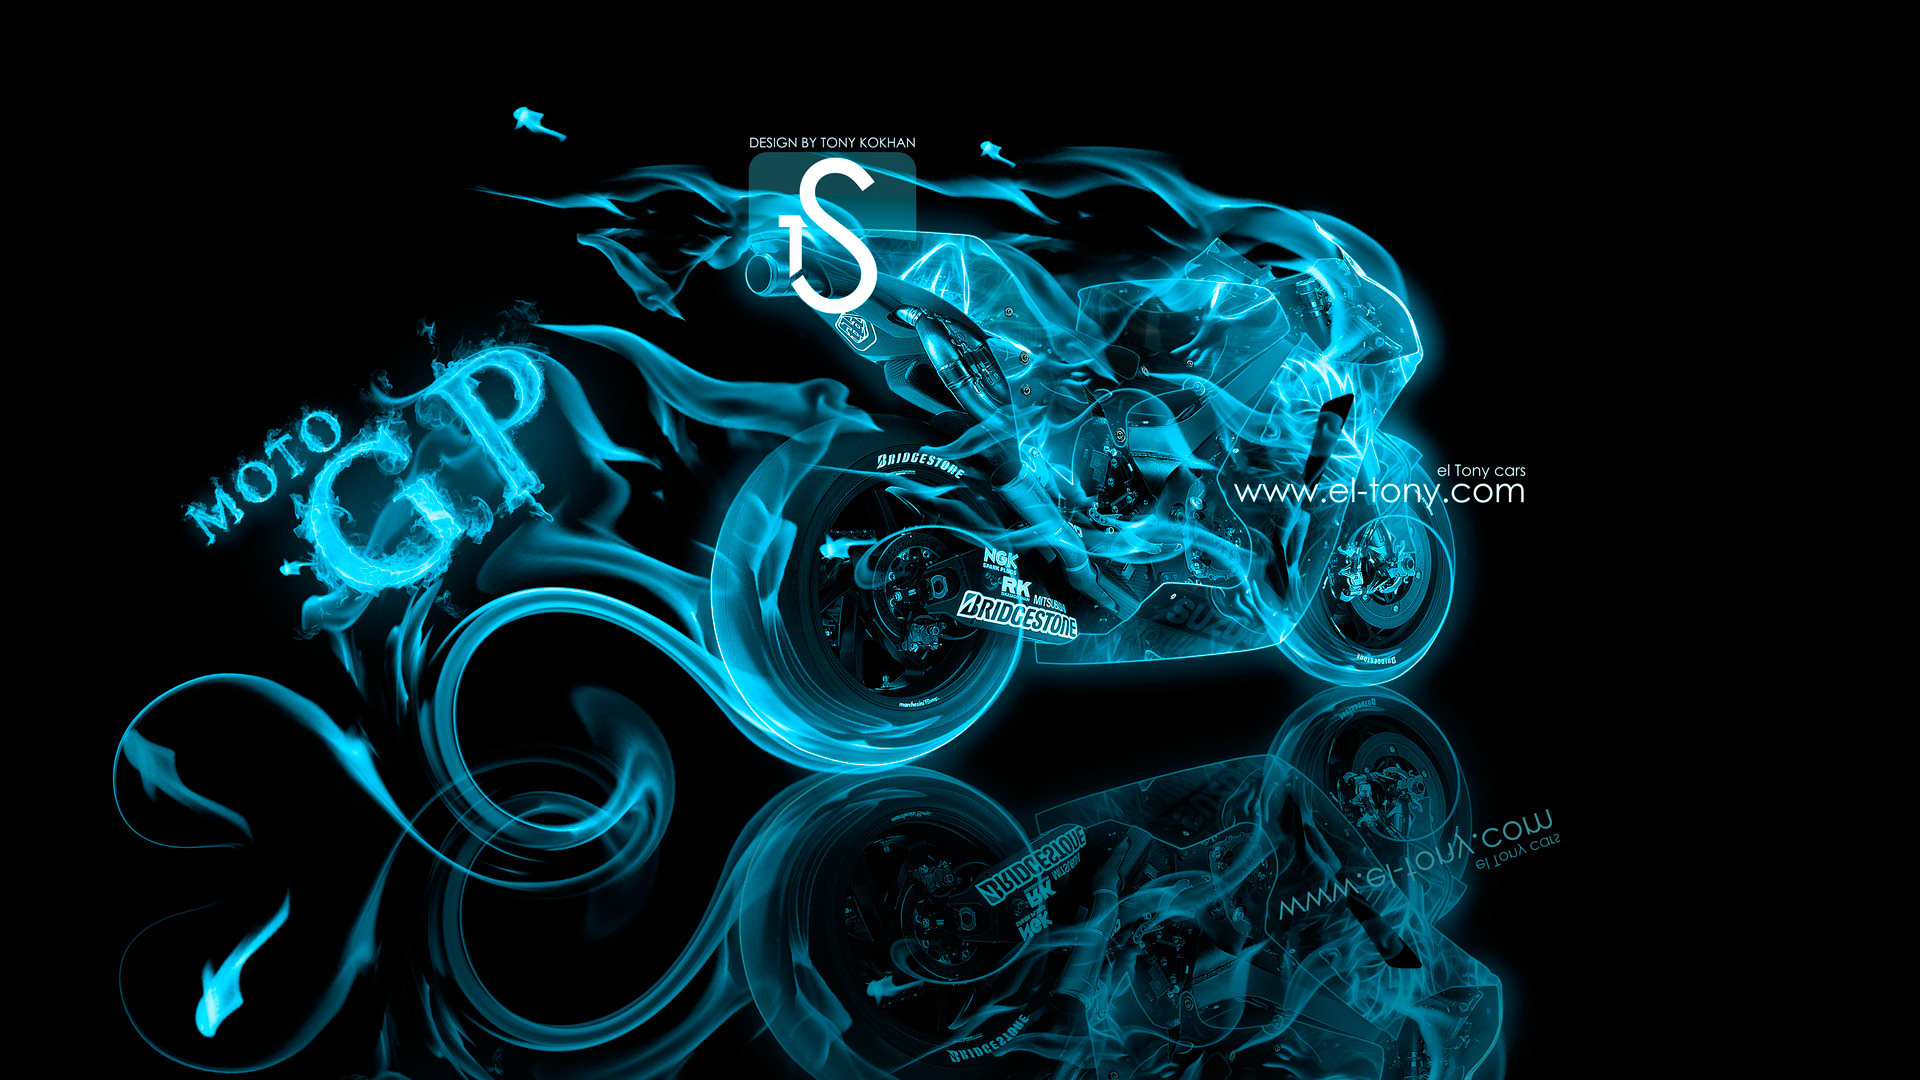 Art 2013 hd wallpapers design by tony kokhan el tony Car Pictures